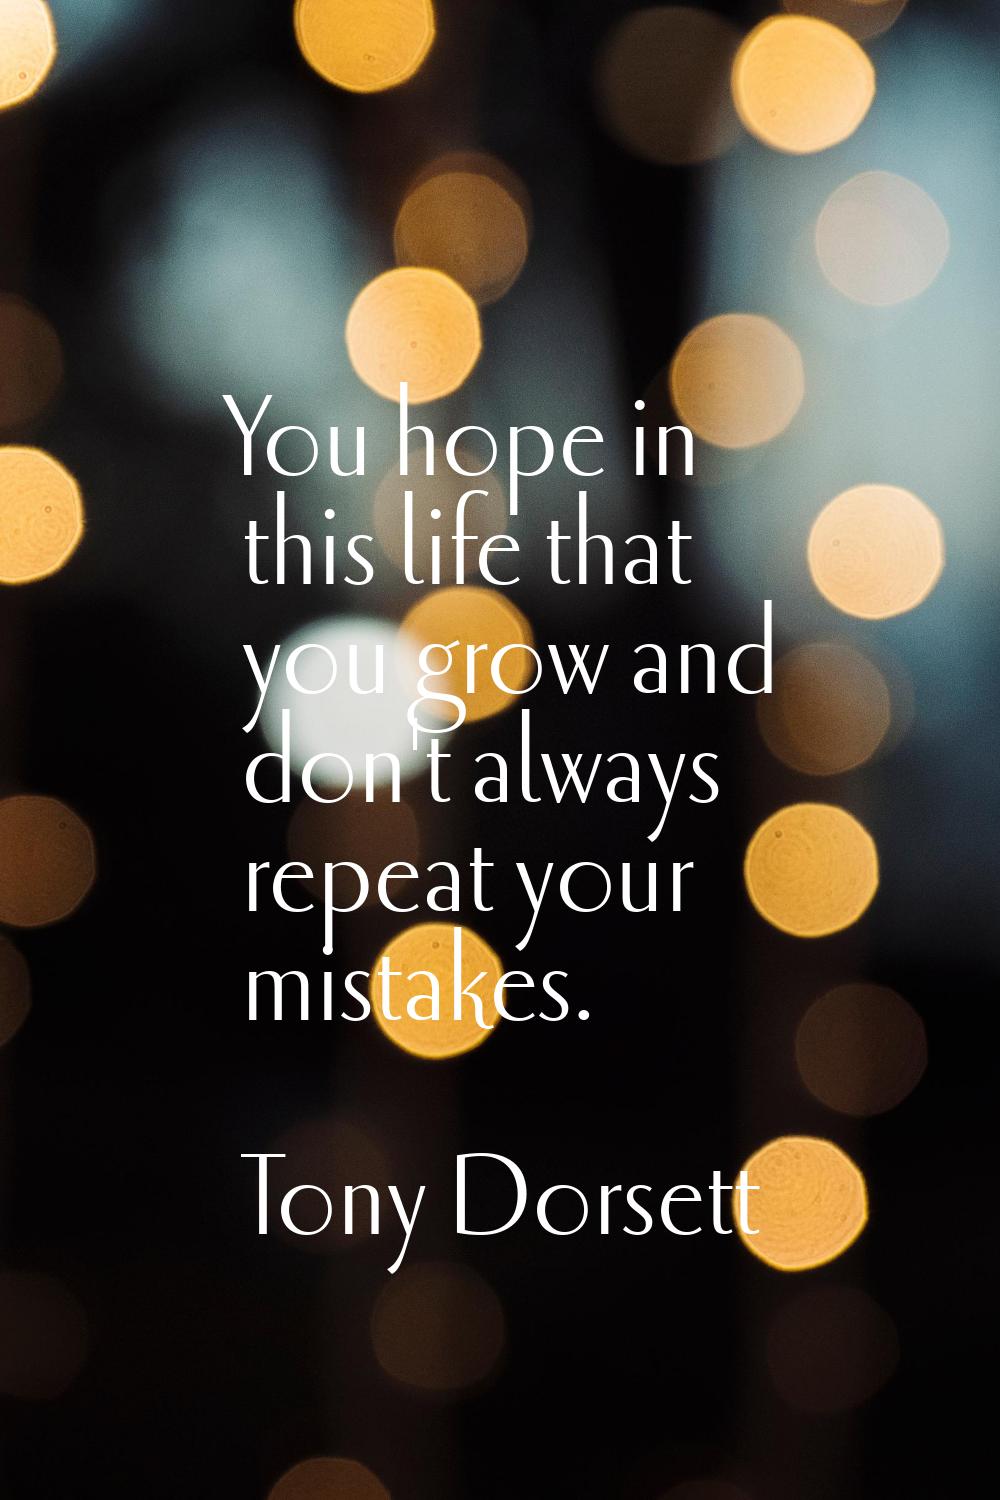 You hope in this life that you grow and don't always repeat your mistakes.